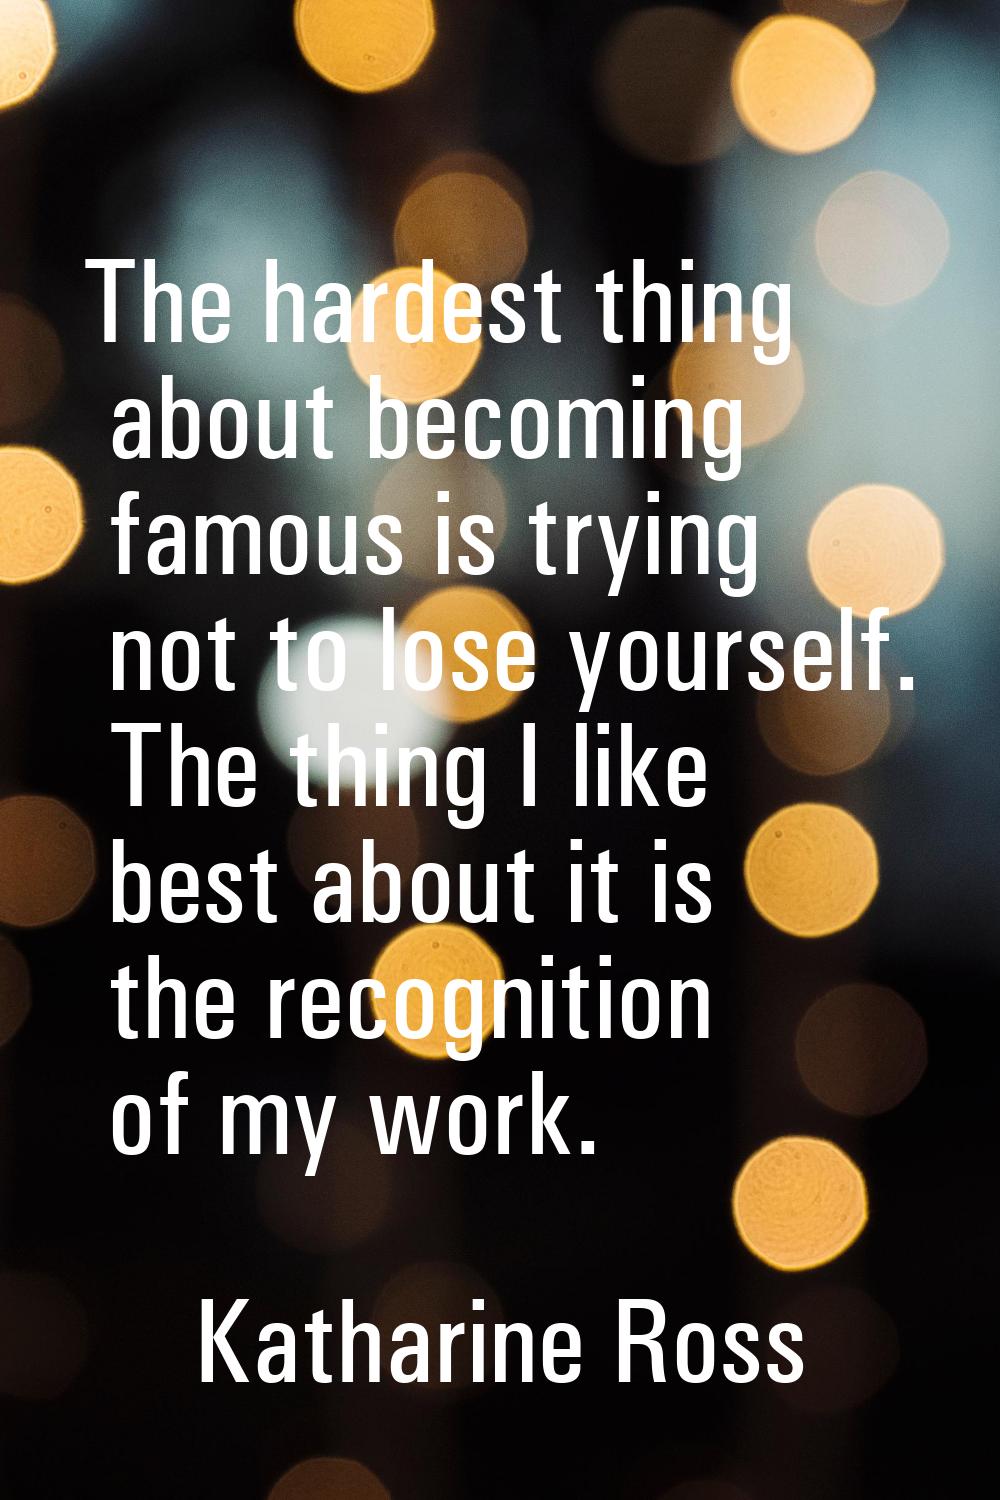 The hardest thing about becoming famous is trying not to lose yourself. The thing I like best about